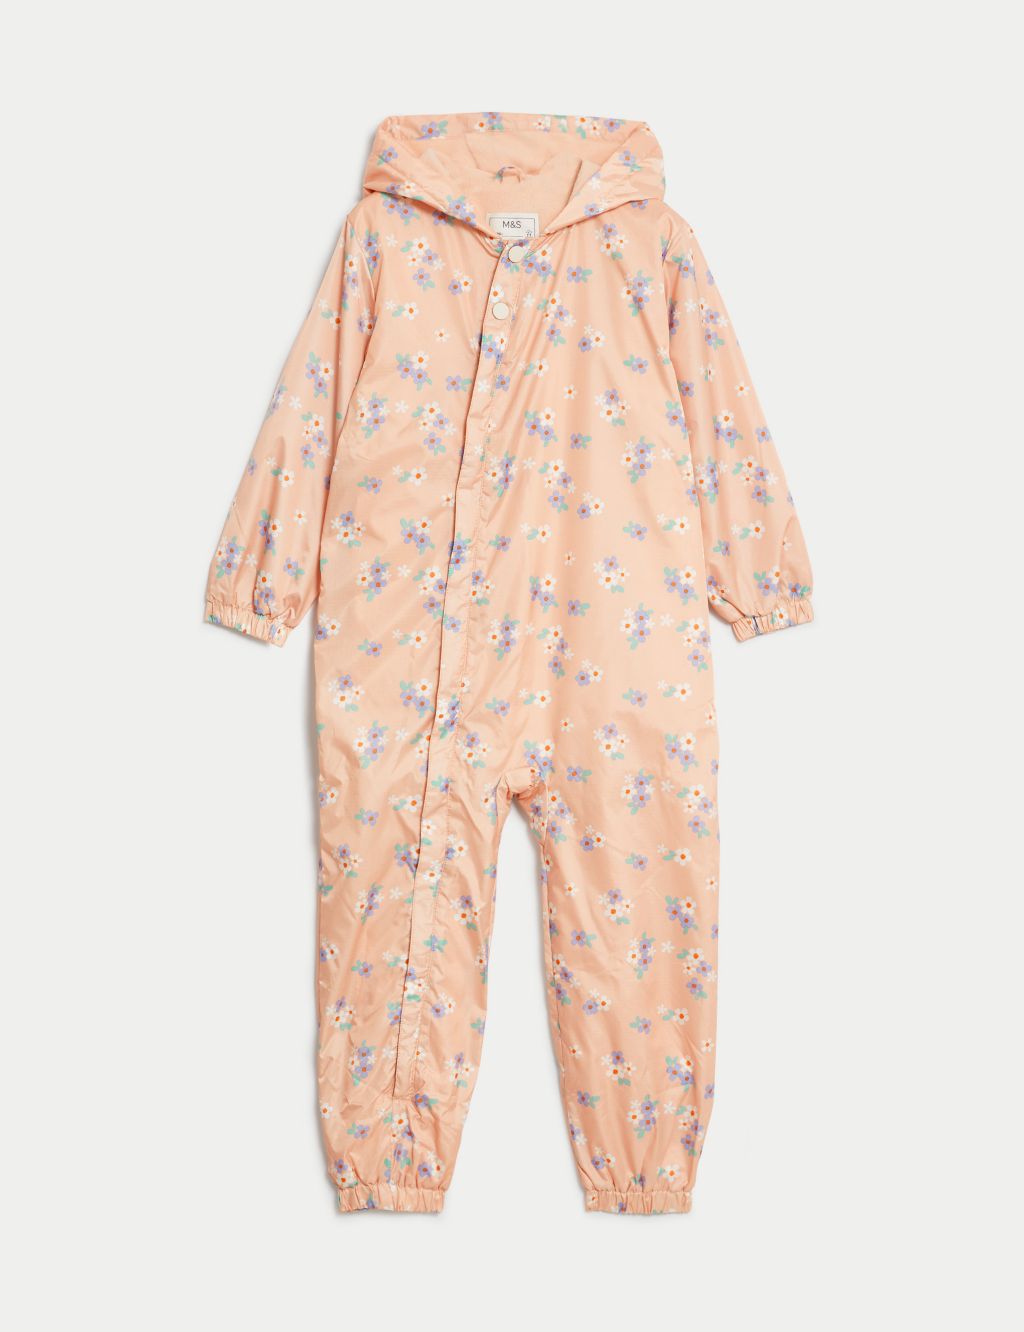 Ditsy Floral Hooded Puddlesuit (3-5 Yrs) image 1